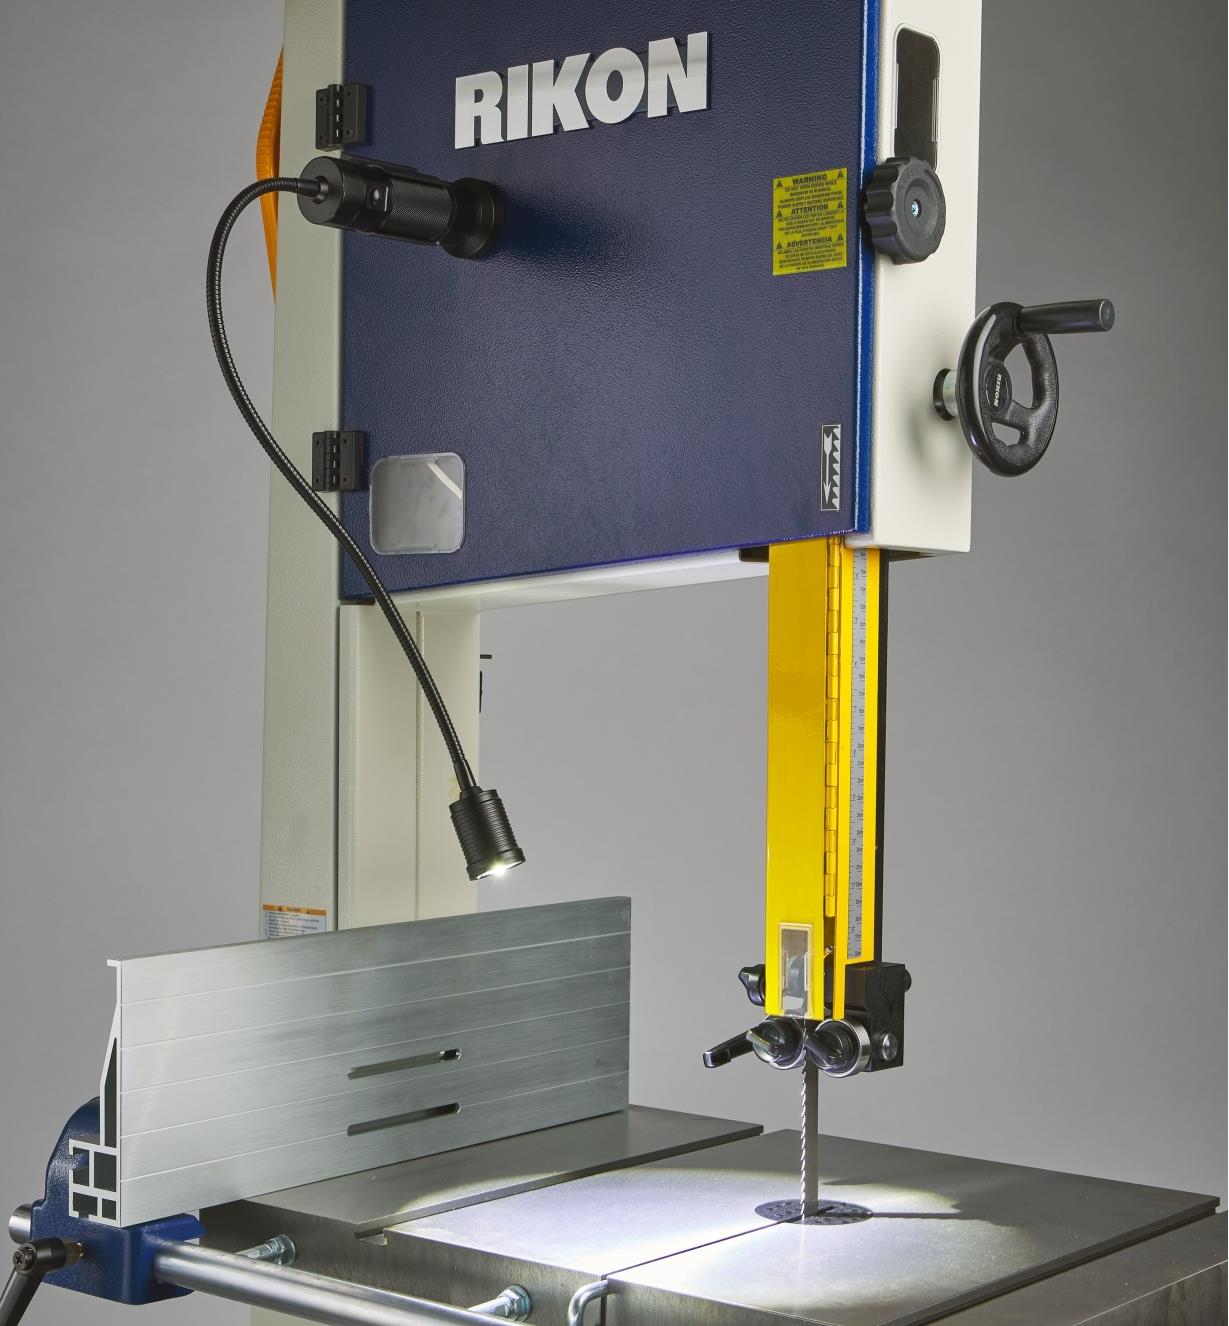 A flex-neck LED work light mounted on the Rikon 10-326 and extended over the saw’s machine table